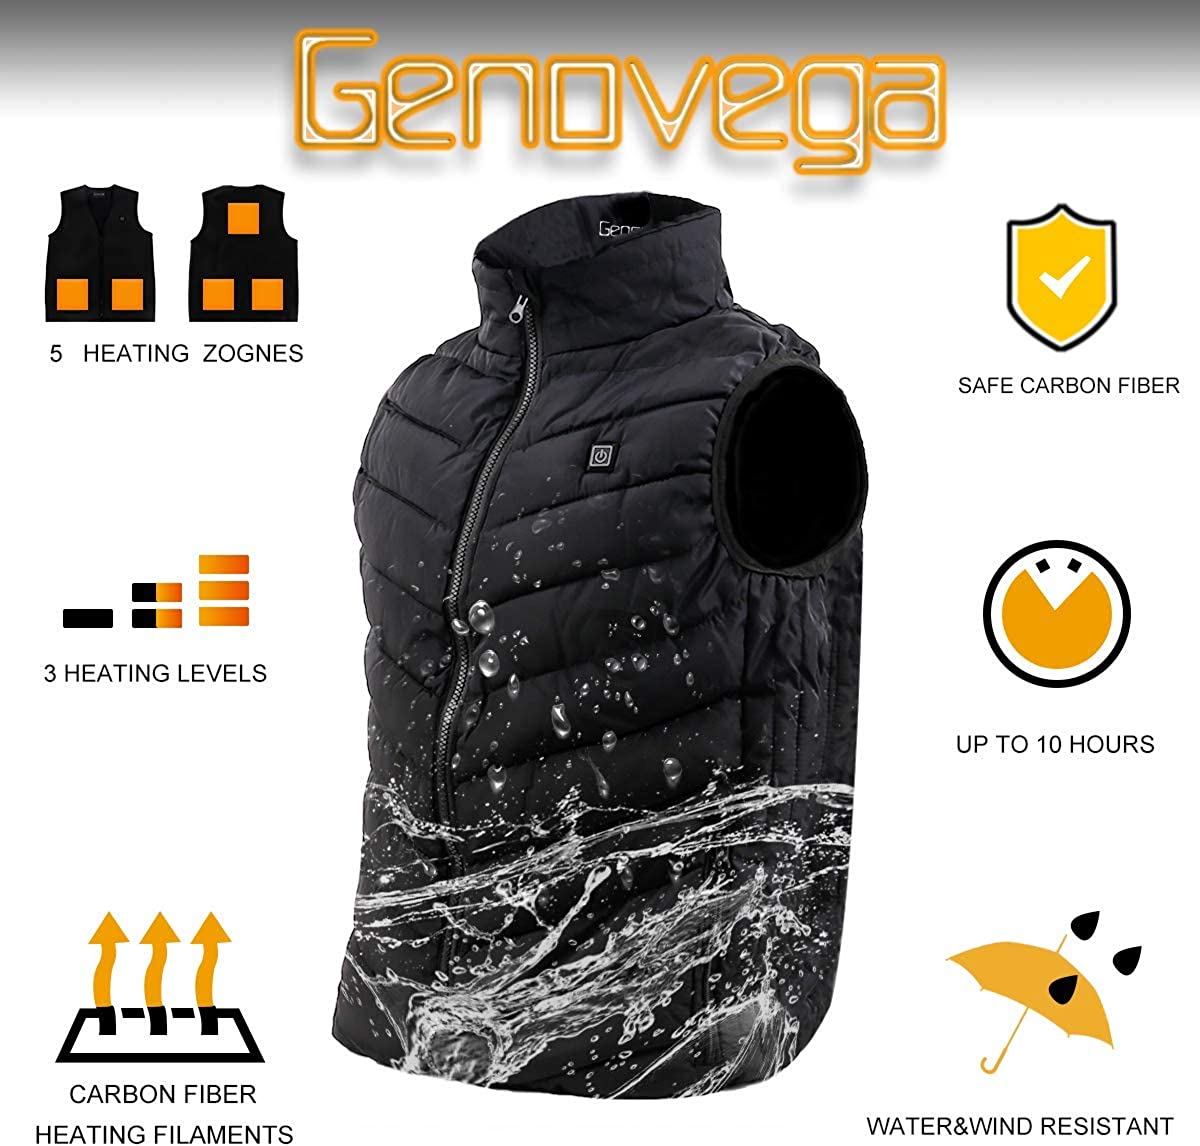 Hilipert Heated Vest Reviews: Does it Really Work? 